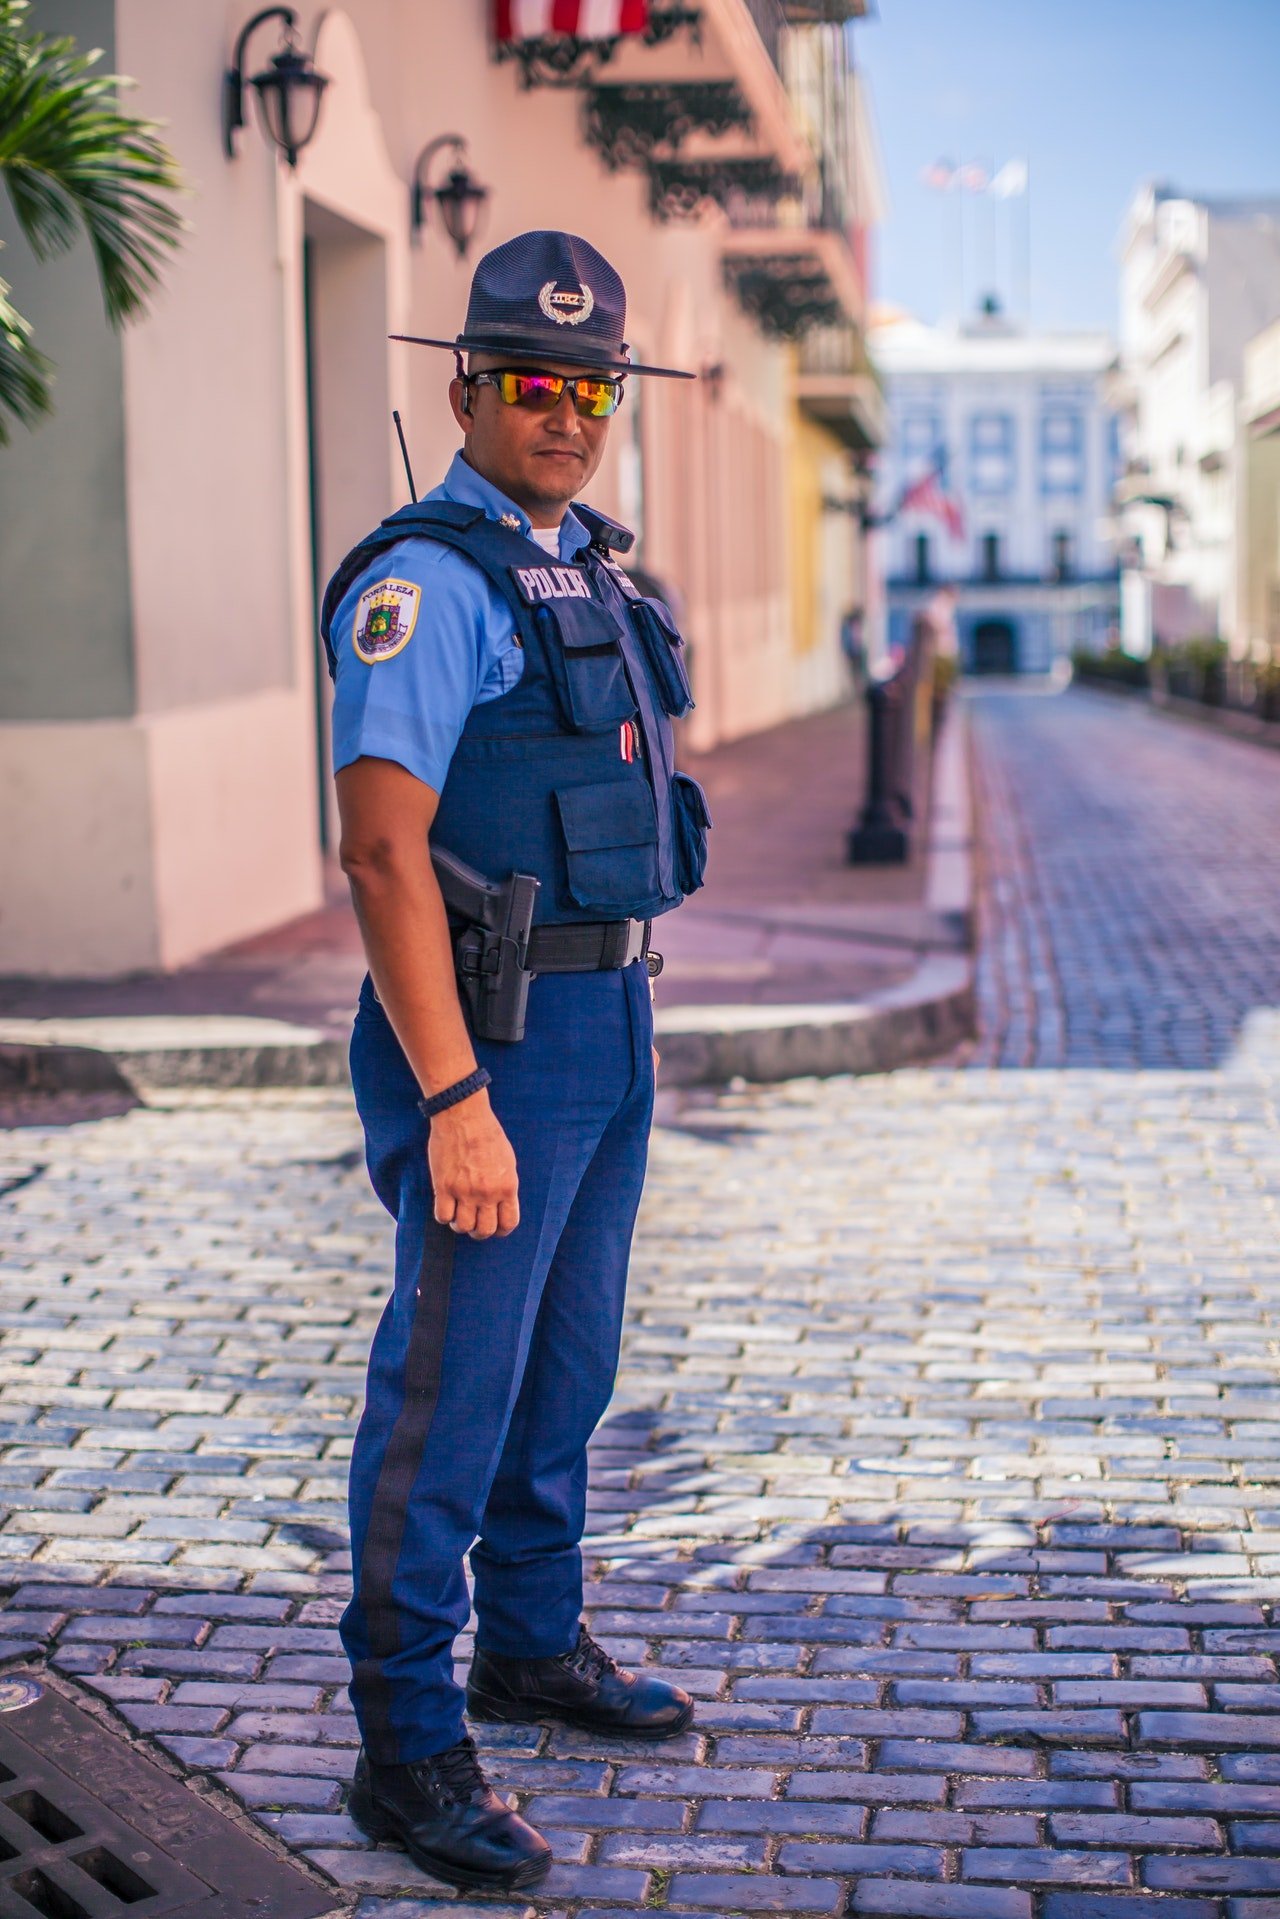 A fully kitted police officer | Photo: Pexels